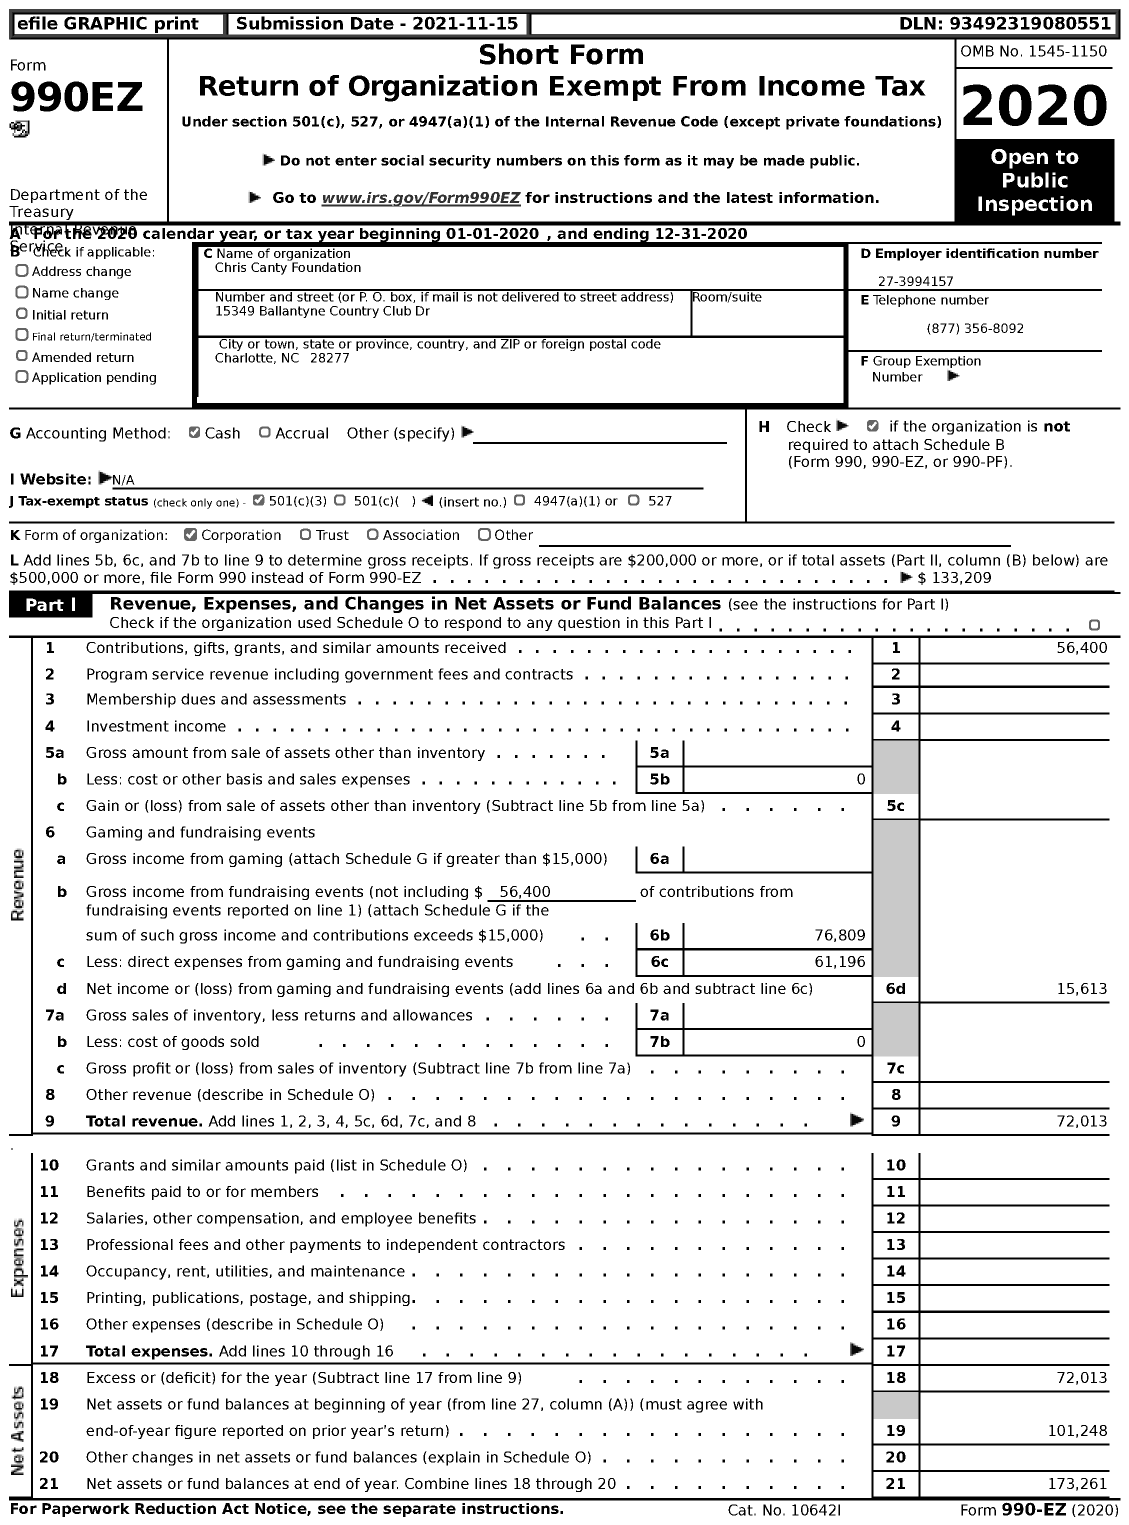 Image of first page of 2020 Form 990EZ for Chris Canty Foundation